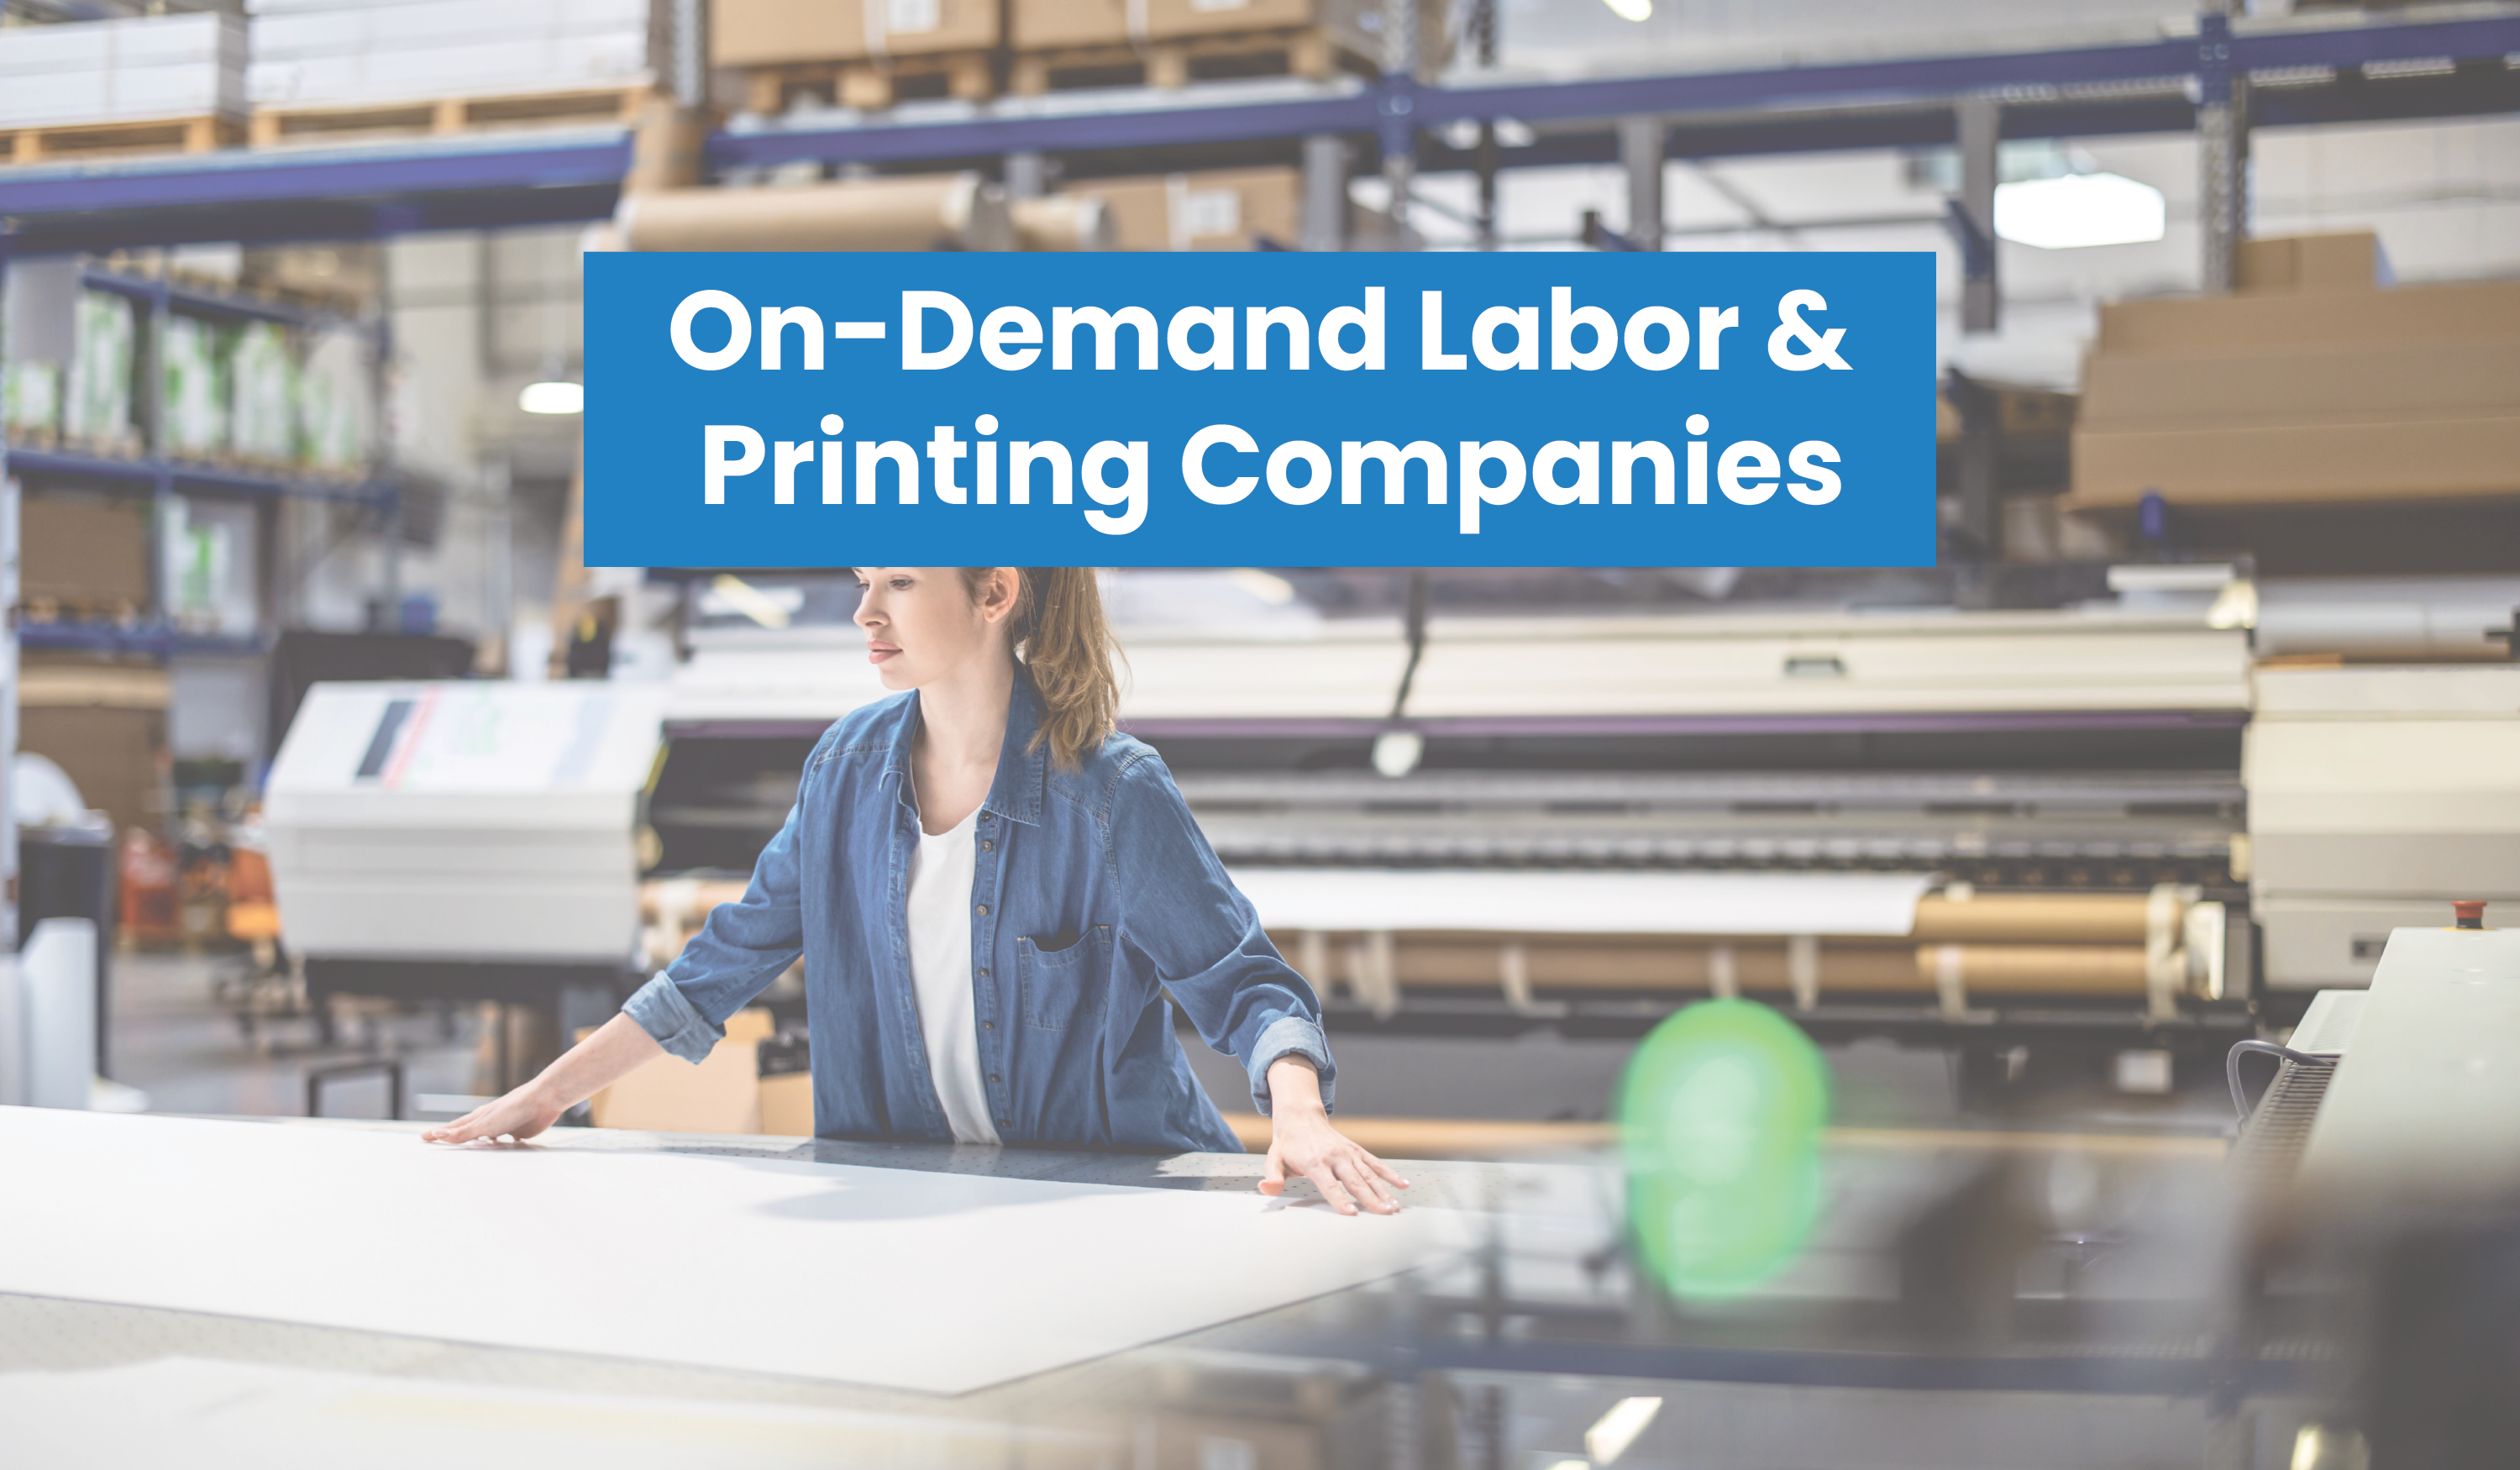 On-Demand Labor Guide for Printing Companies